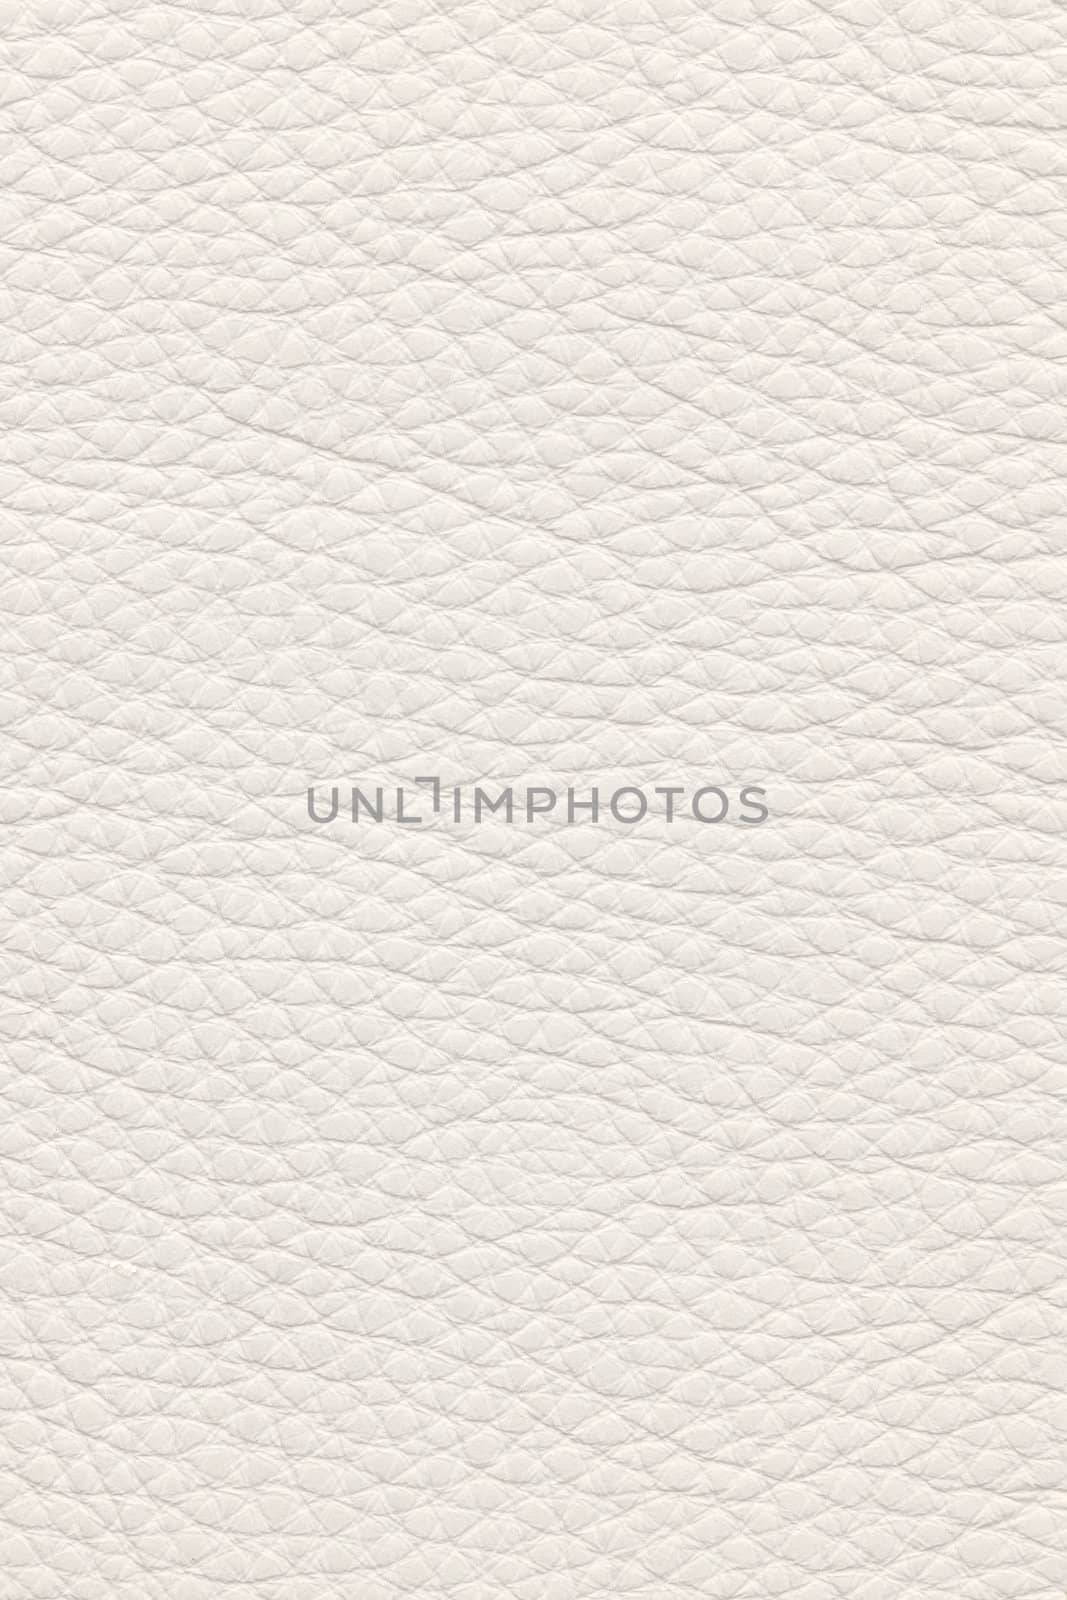 White natural leather background or texture close up